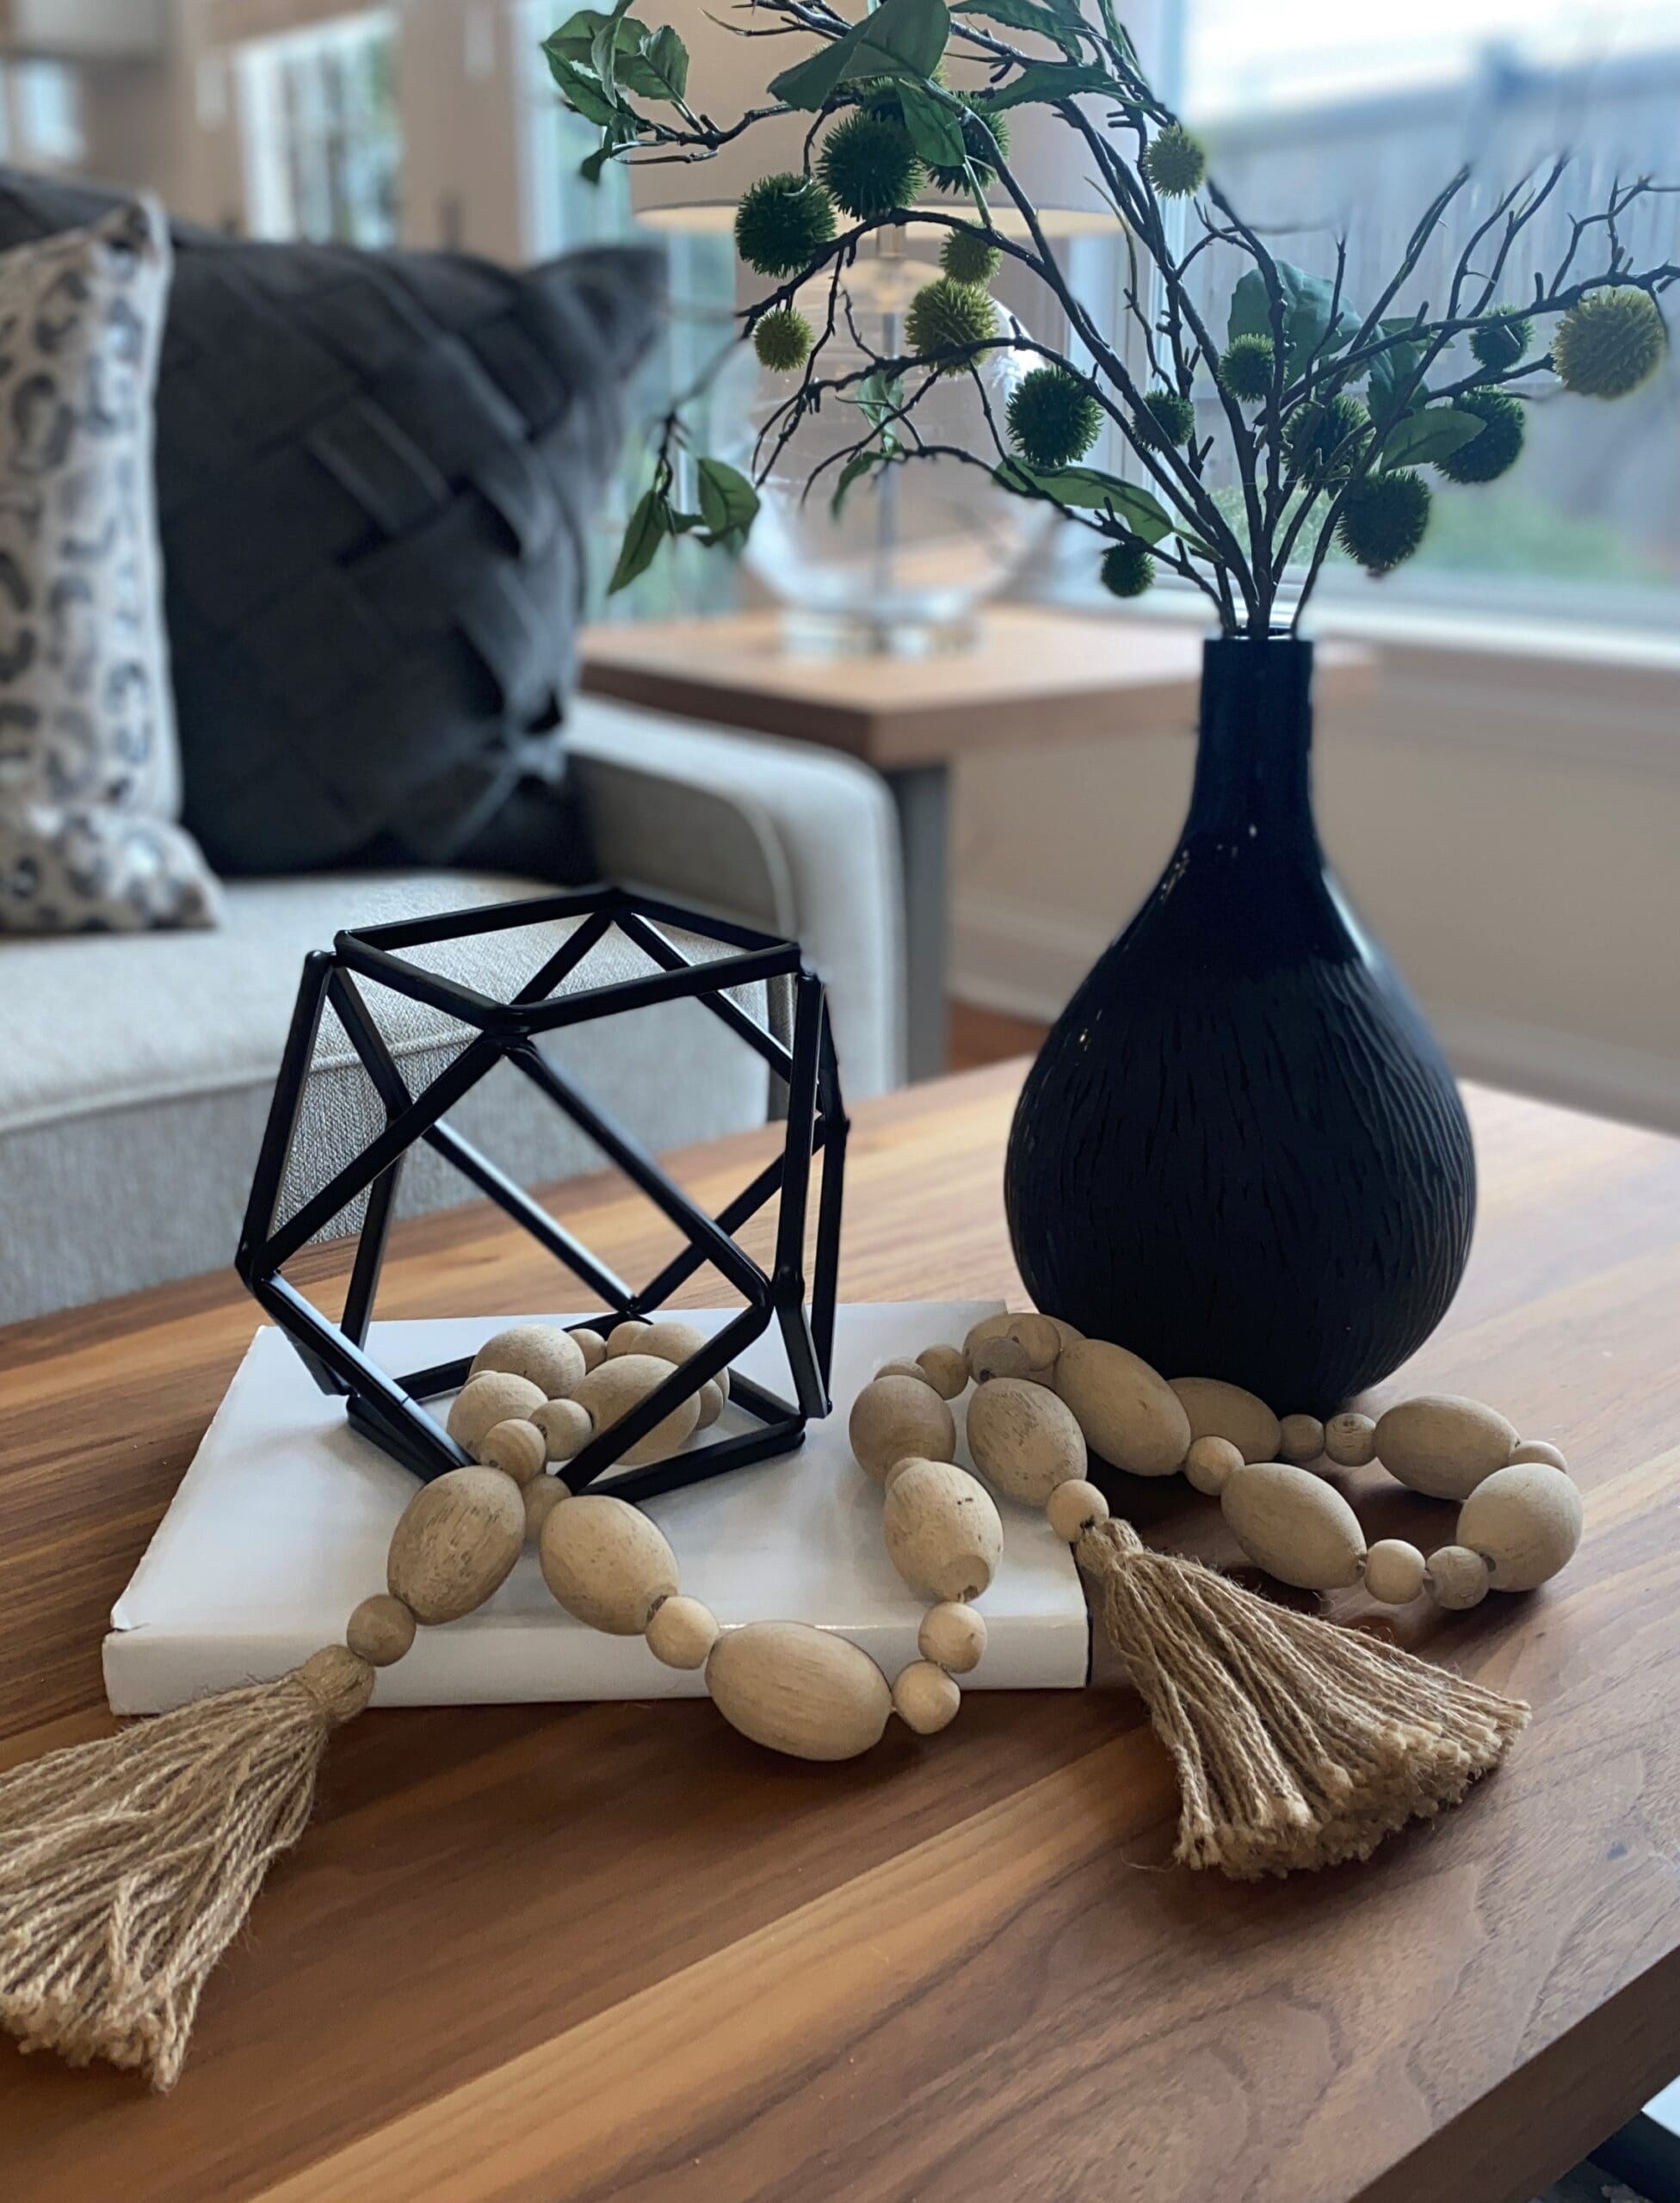 A wooden coffee table adorned with a vase and a black and white geometric sculpture.